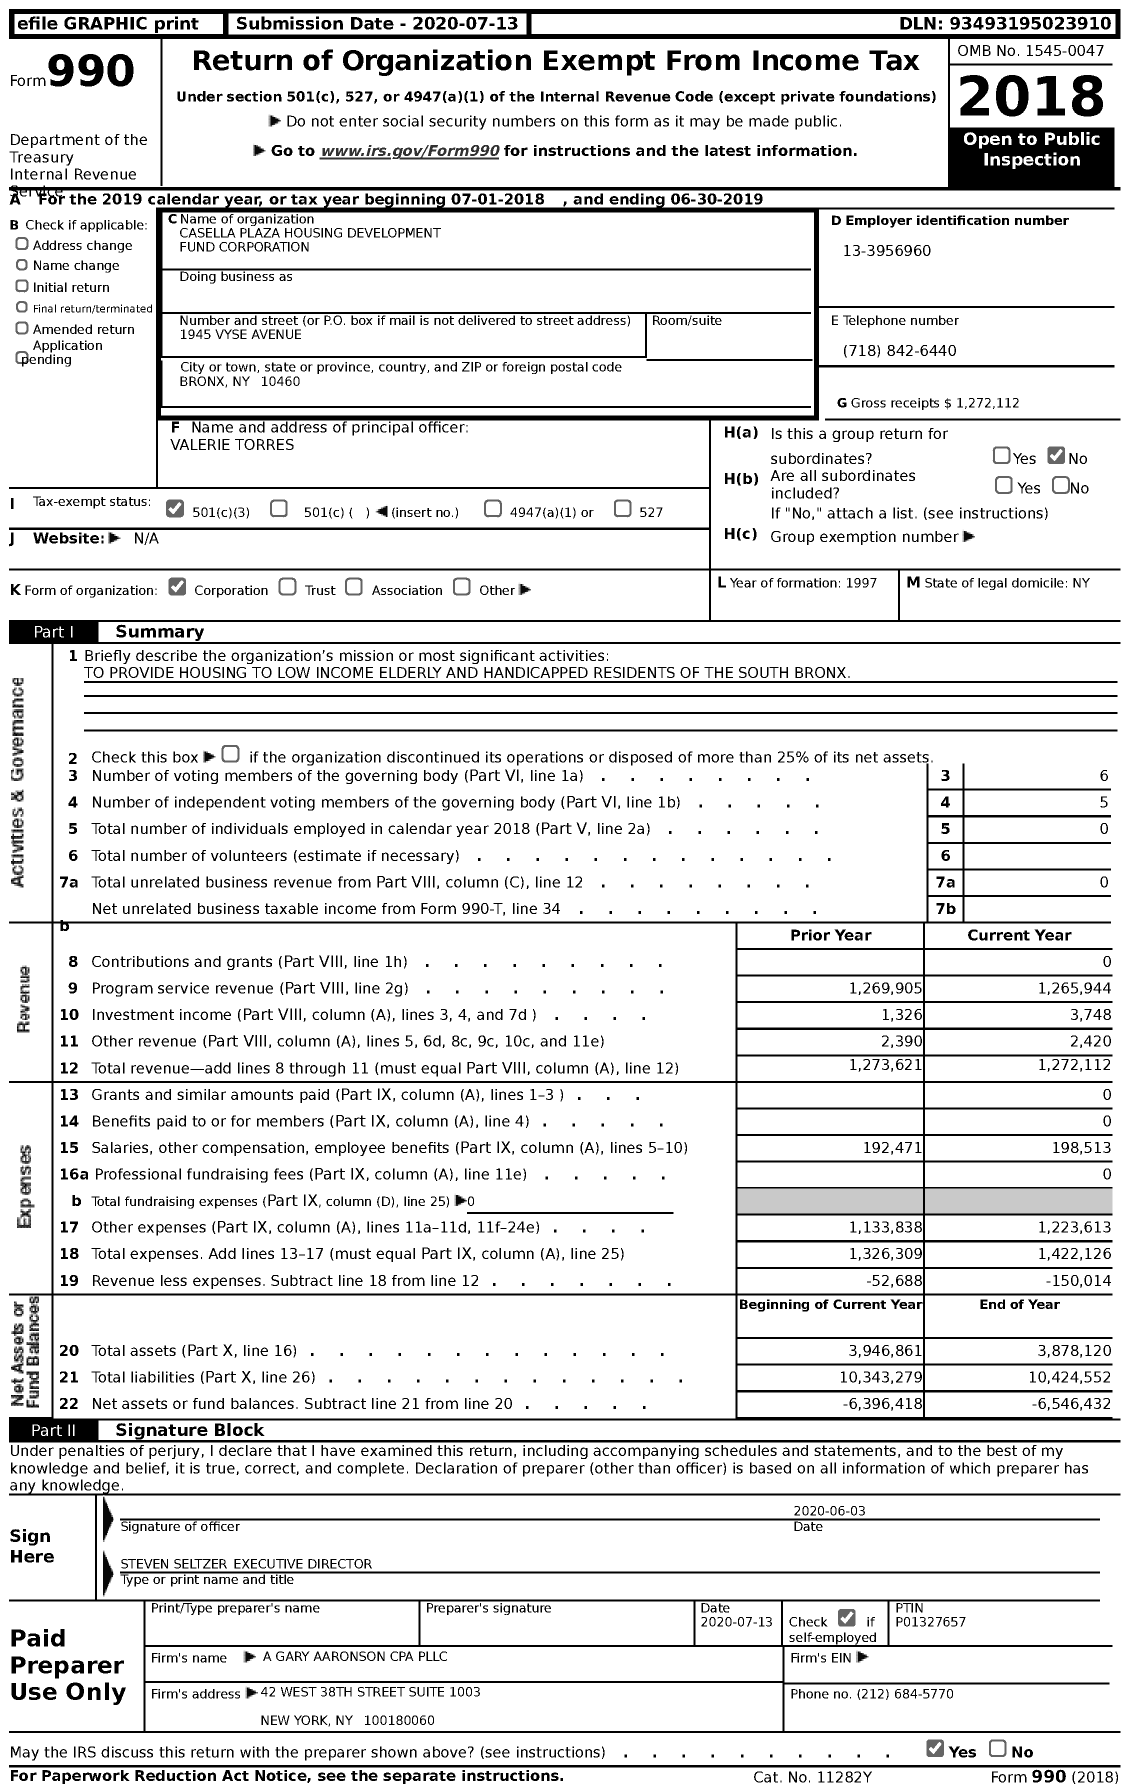 Image of first page of 2018 Form 990 for Casella Plaza Housing Development Fund Corporation